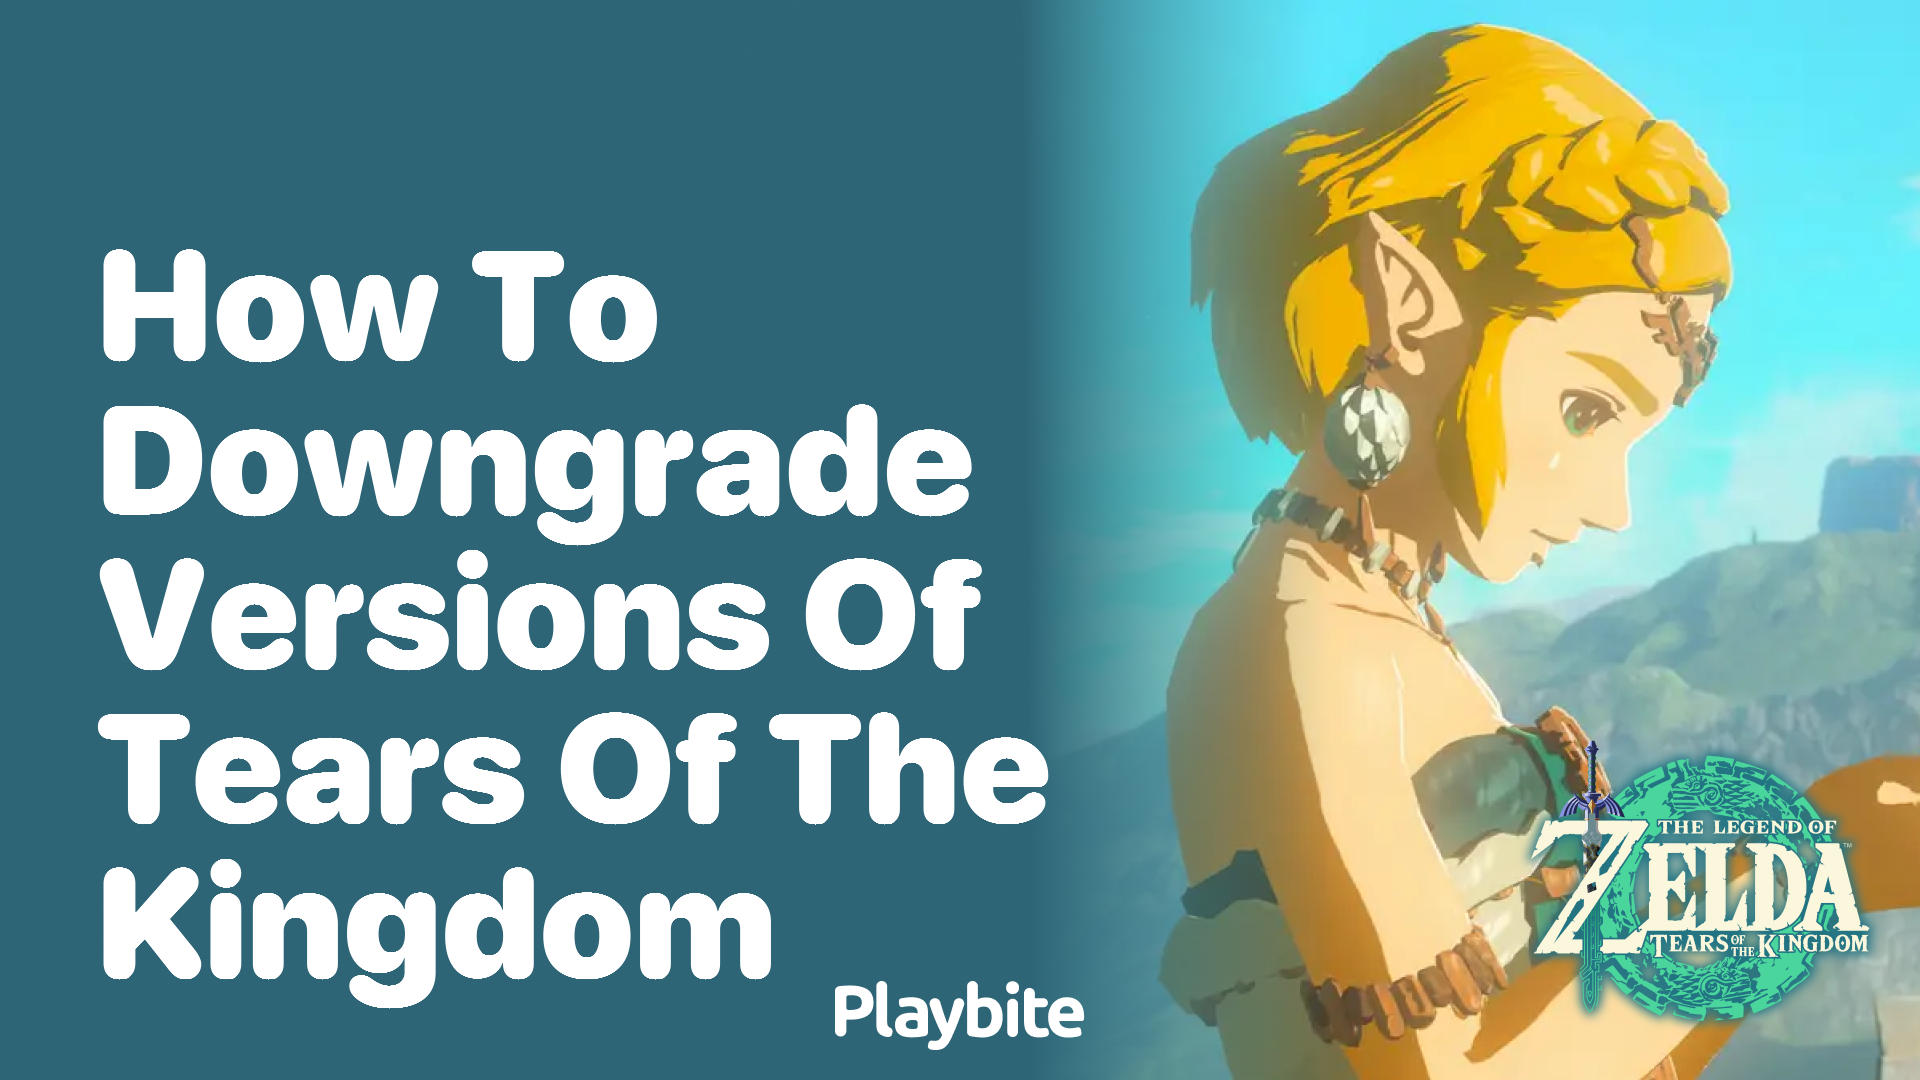 How to Downgrade Versions of Tears of the Kingdom